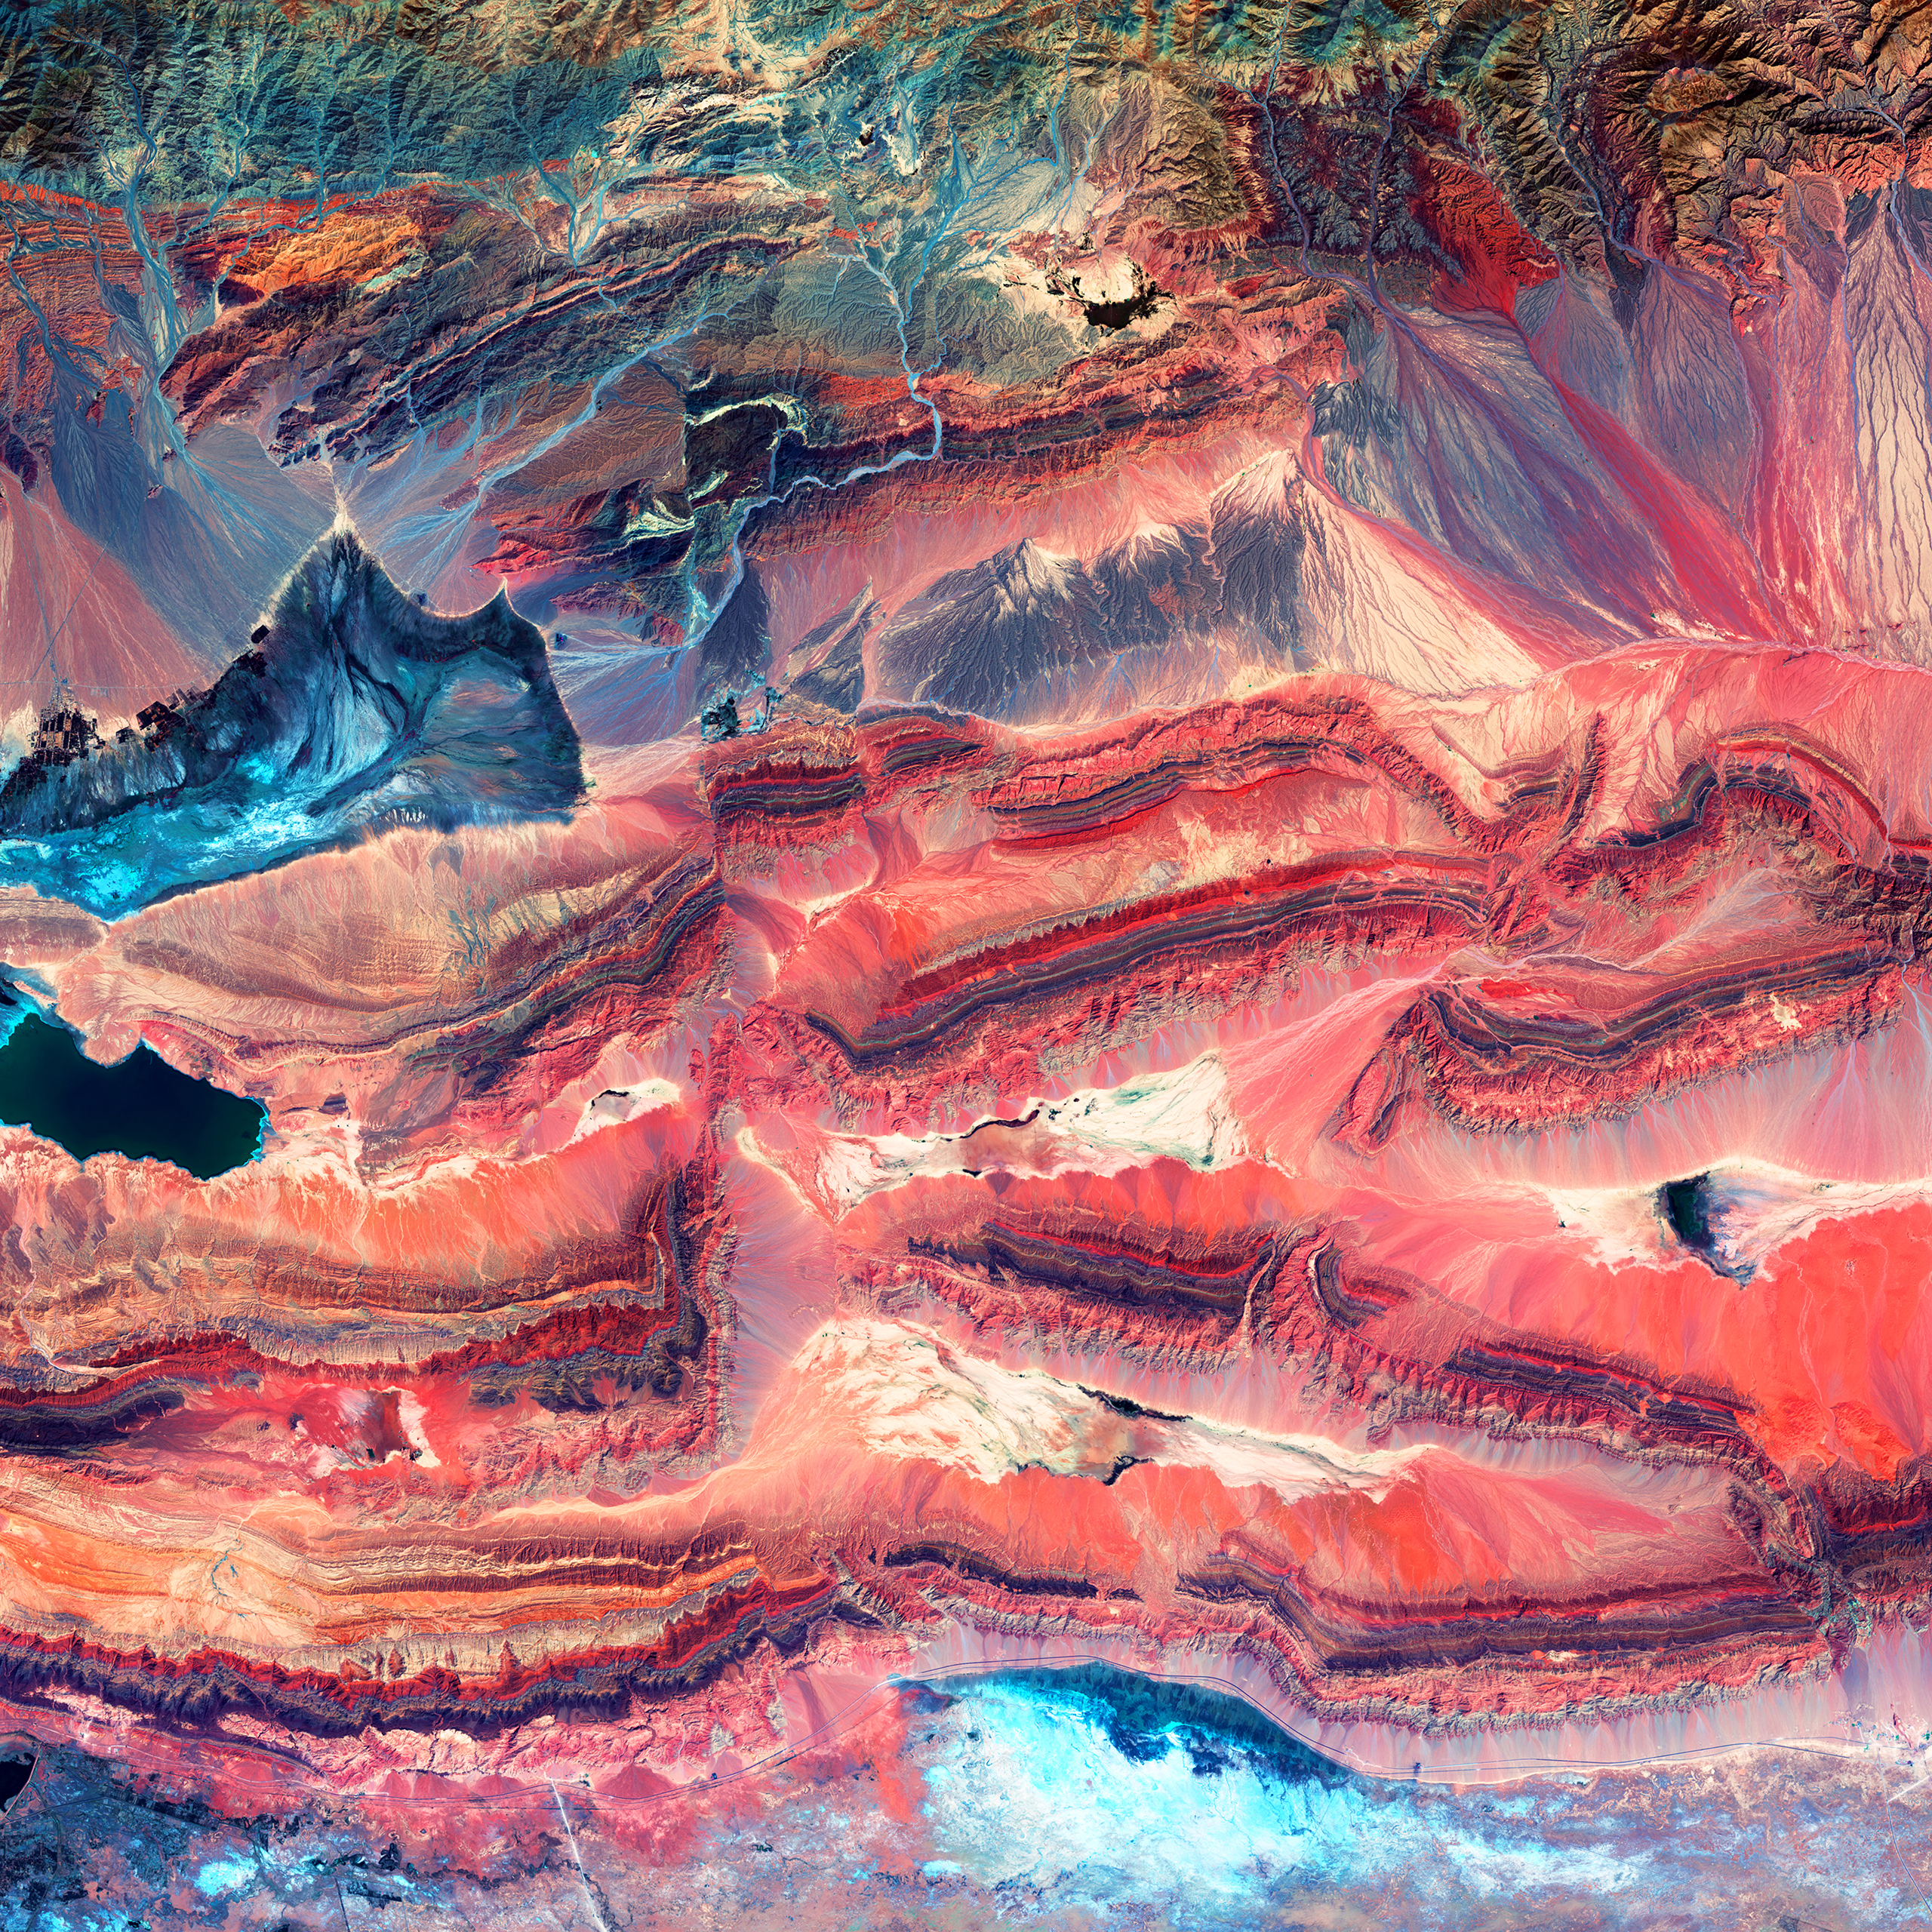 Western ChinaDifferent colors in this image of geologic faults indicate rocks that formed at different times and in different environments. July 30, 2013.